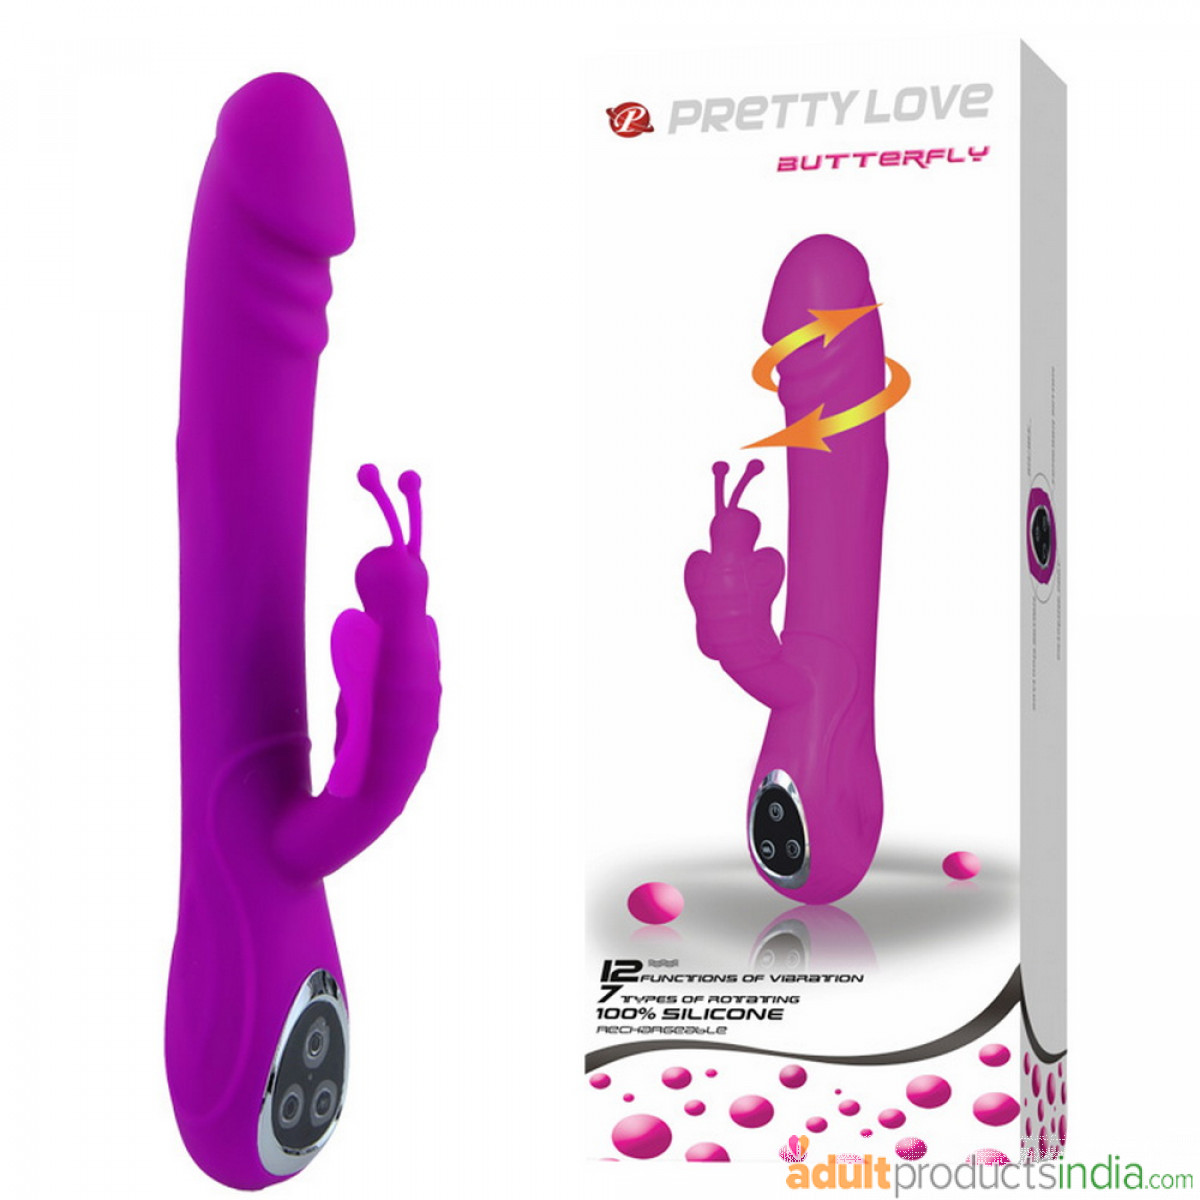 Sweet companion 12 Frequency Massager